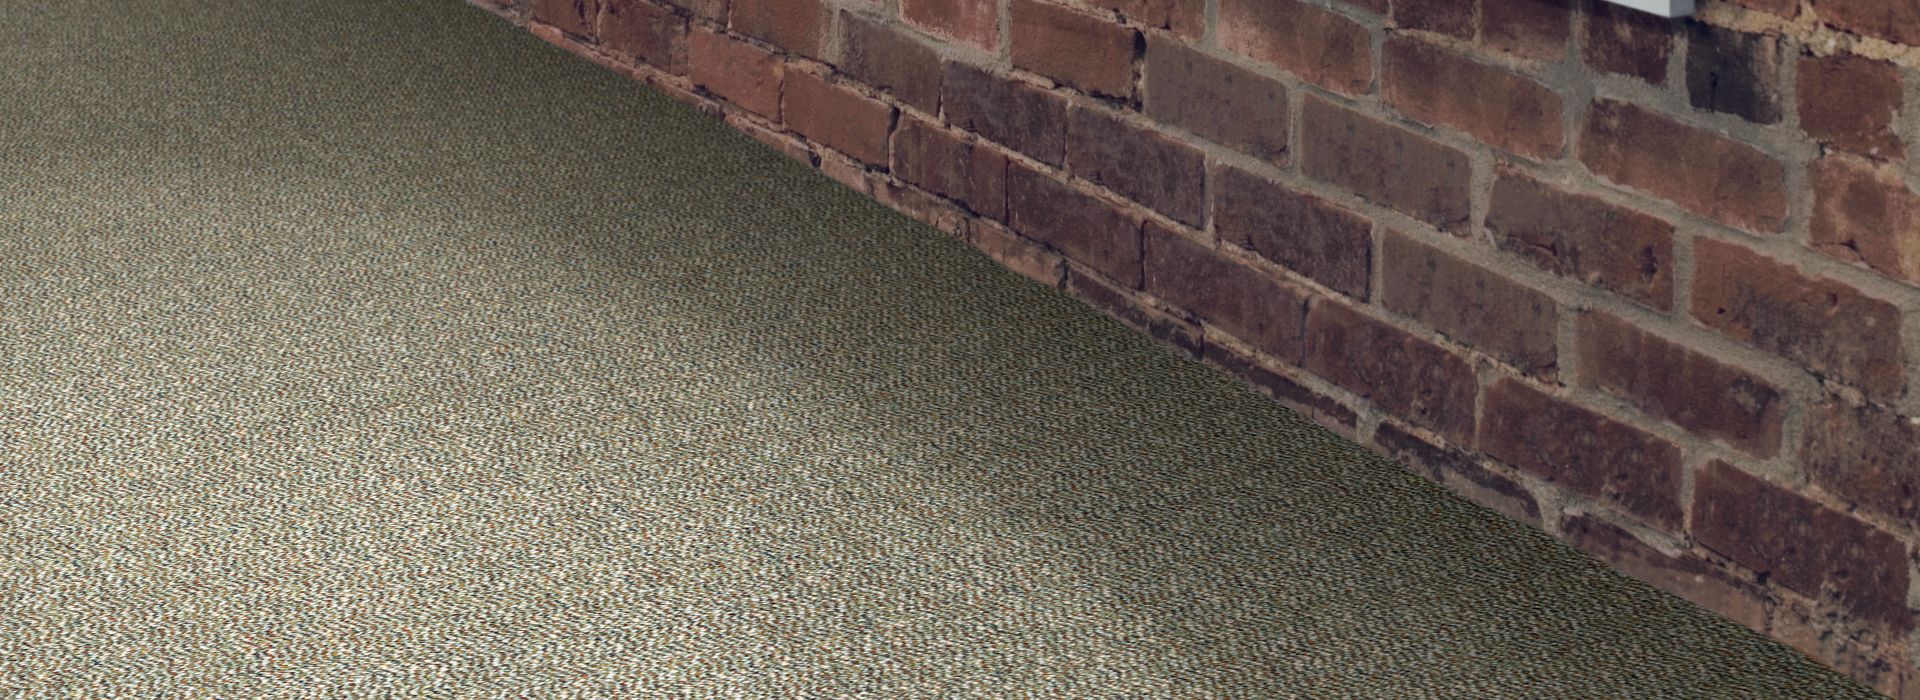 Interface Earth II carpet tile in room with brick wall and orange glass in window